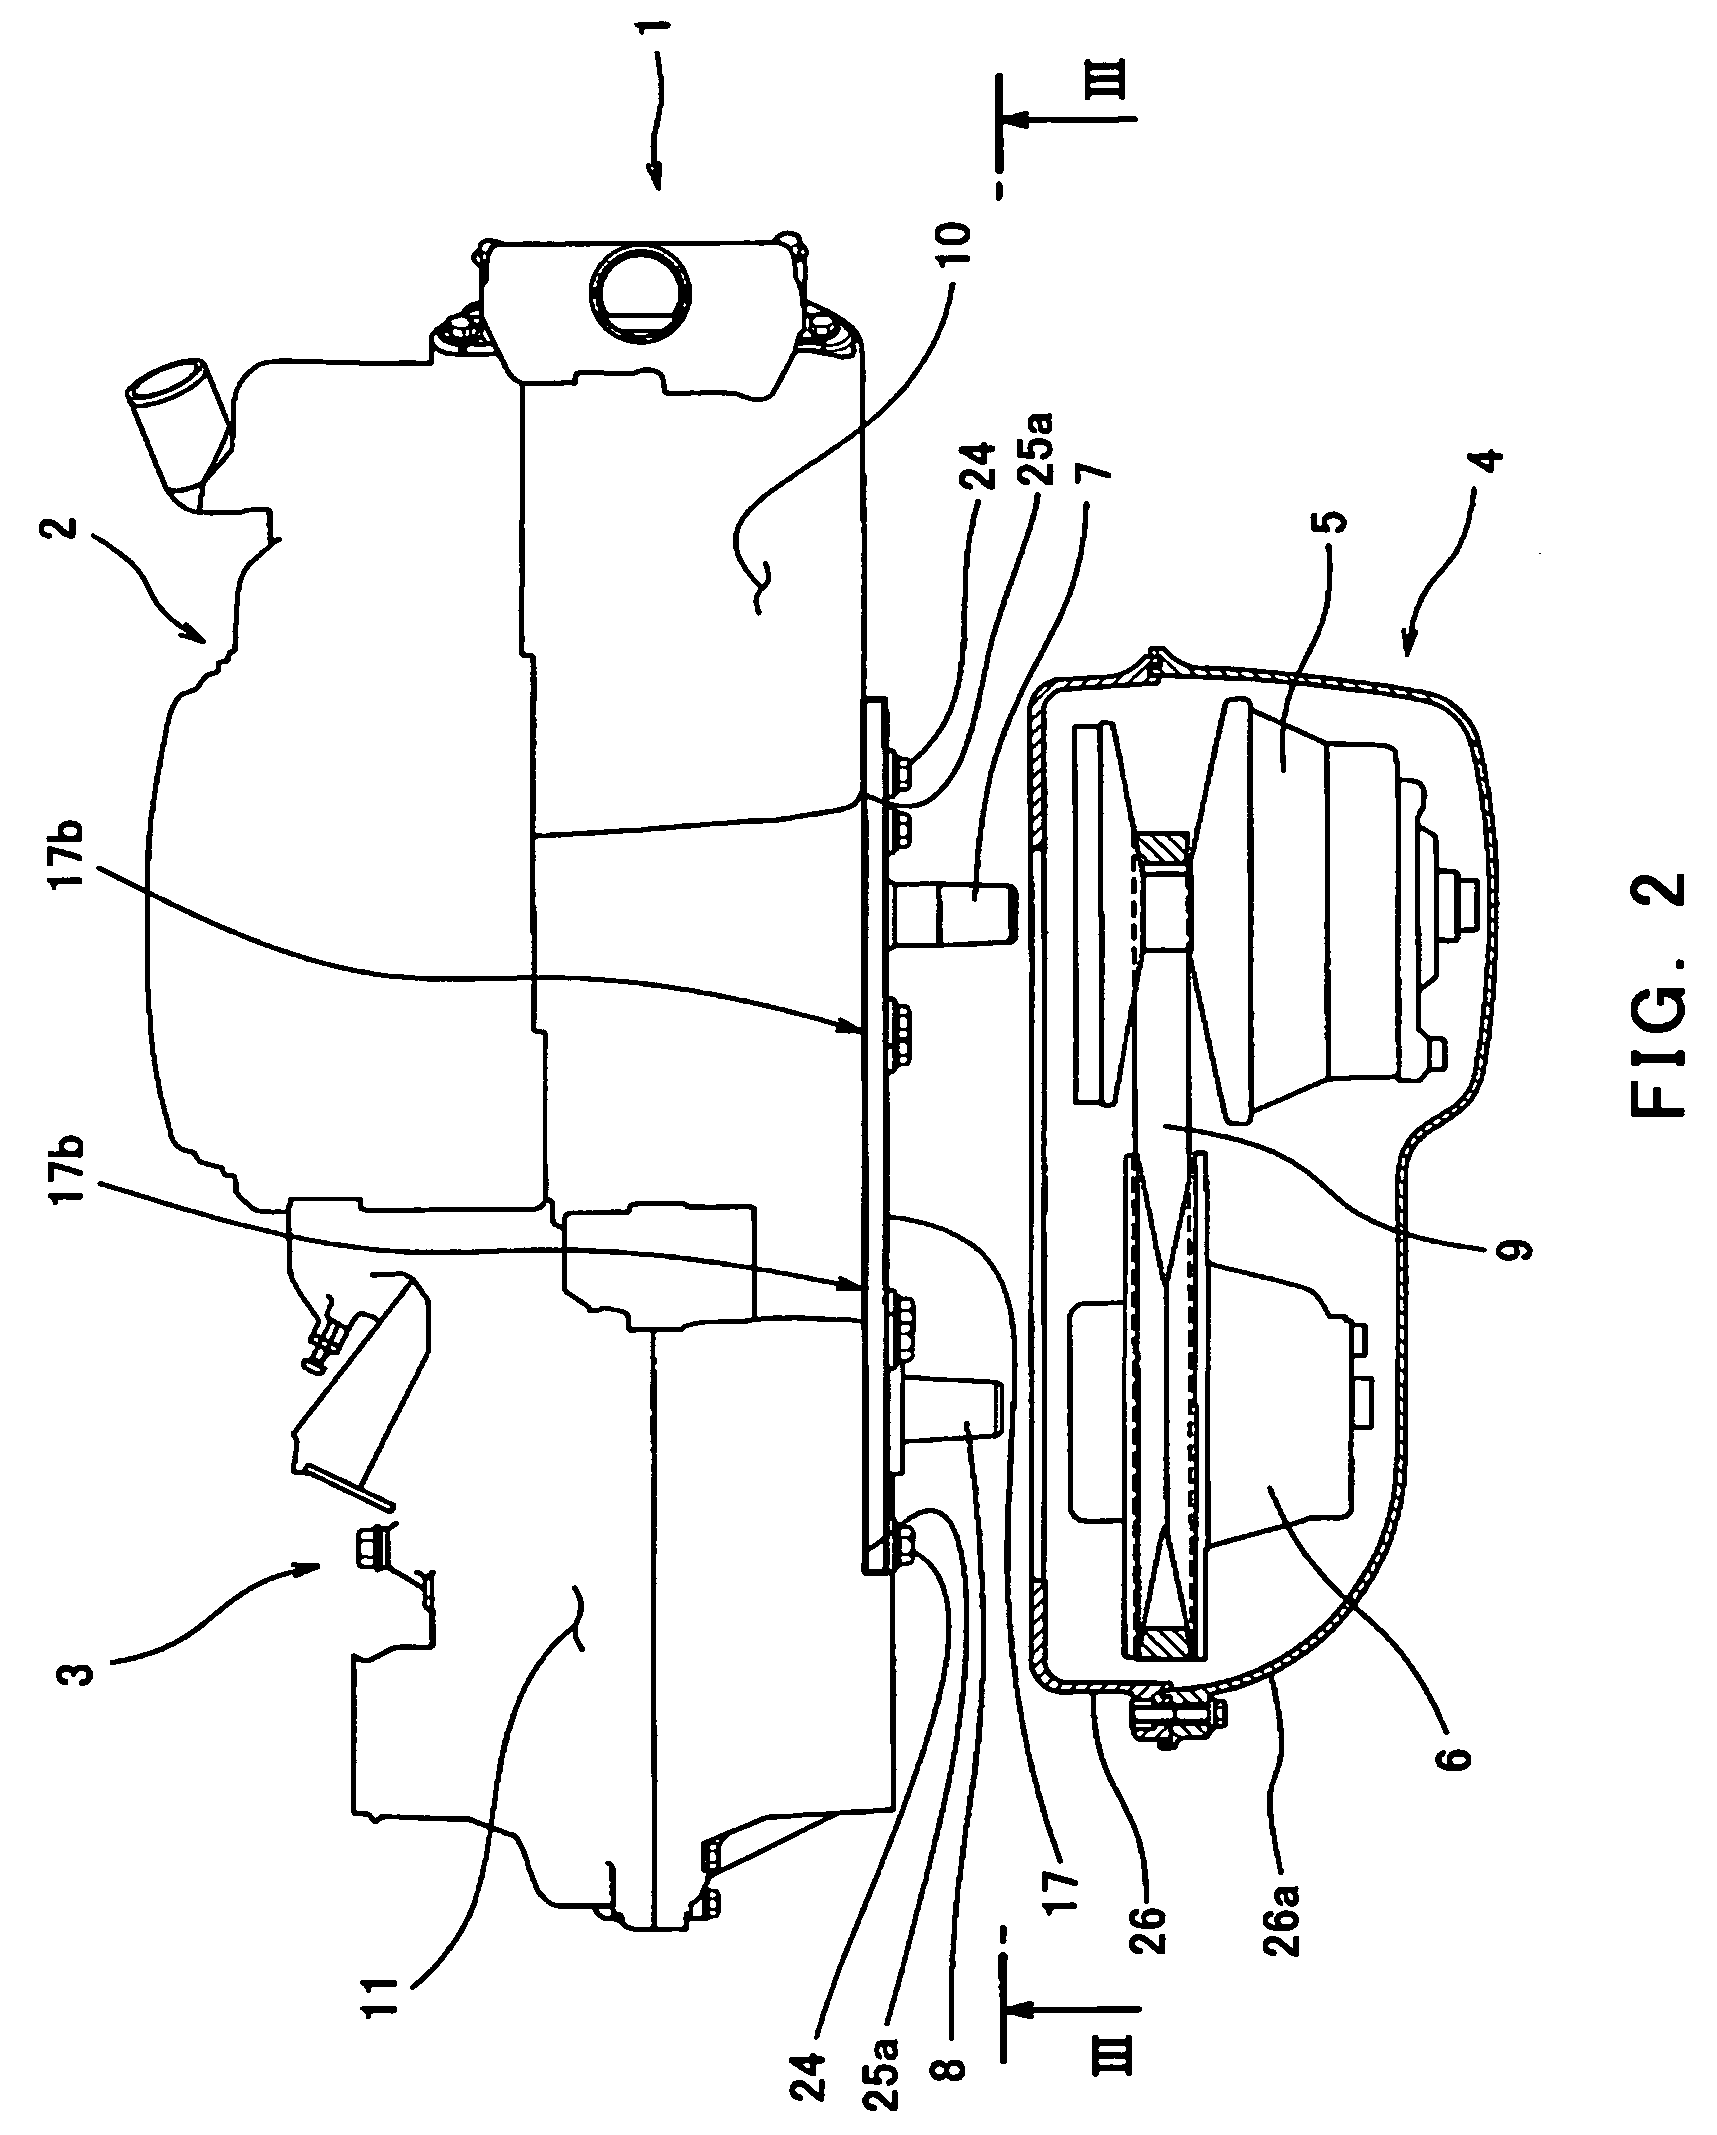 Utility vehicle and assembly of engine and transmission for utility vehicle